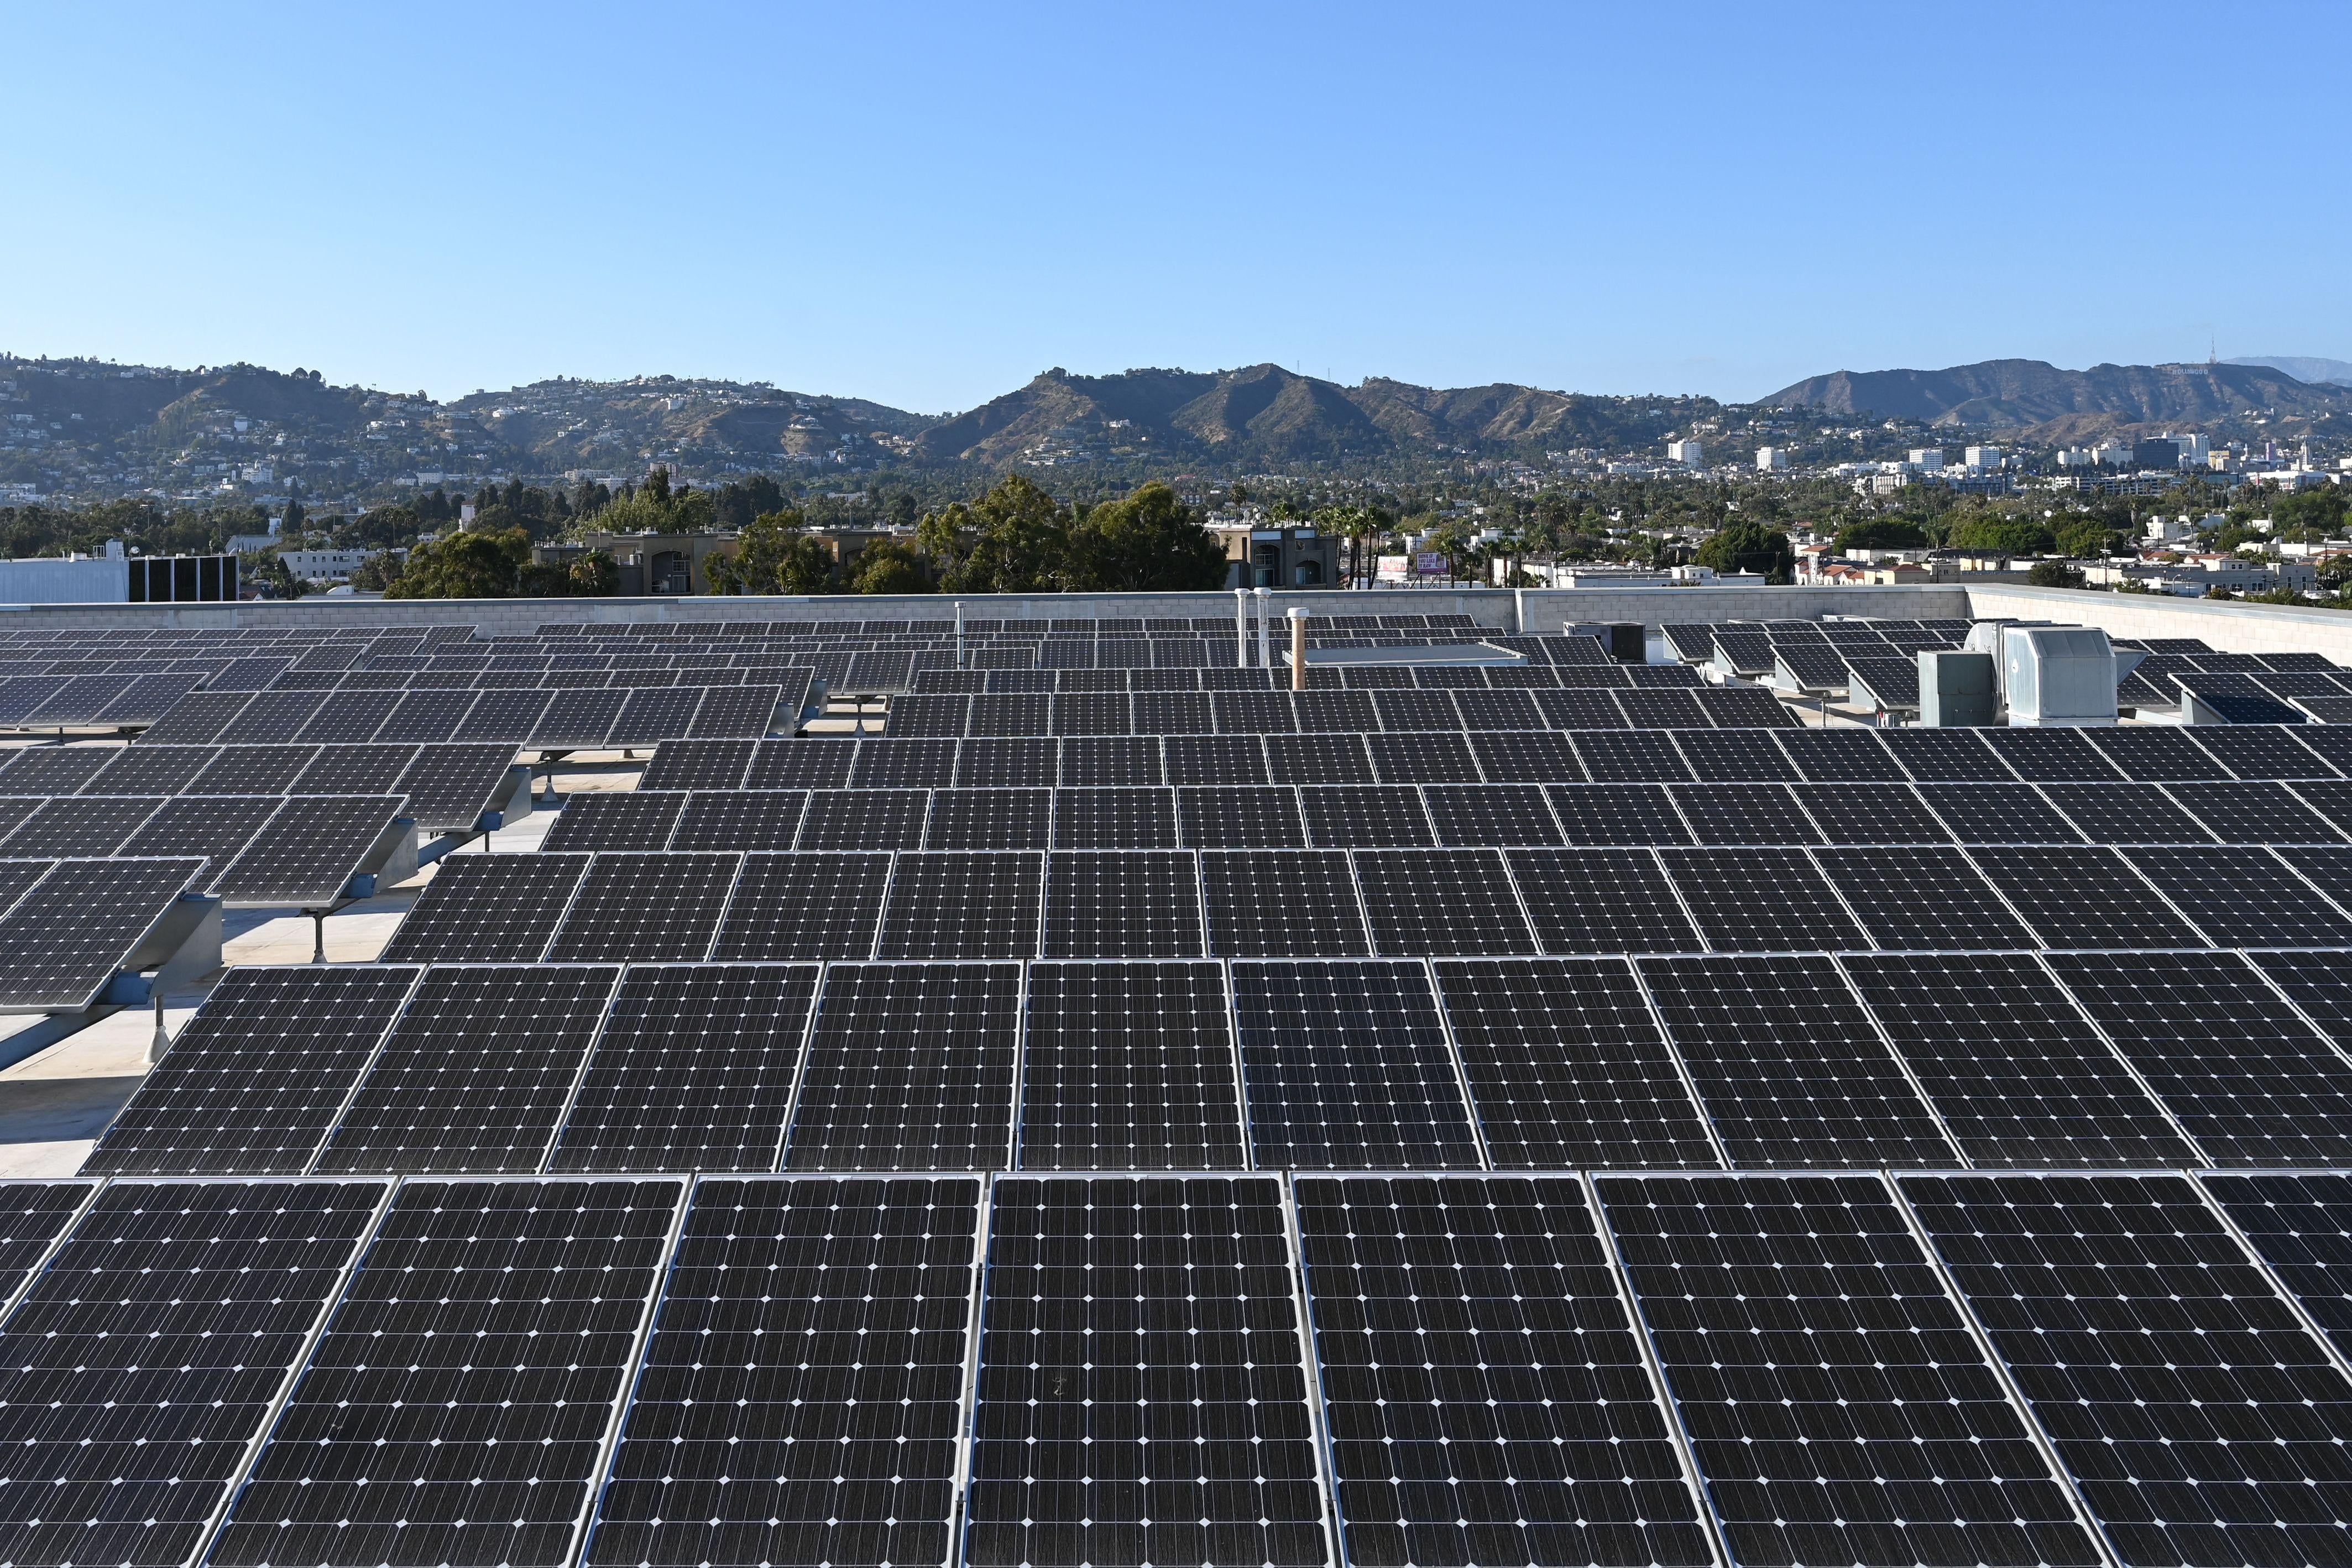 An array of rooftop solar panels